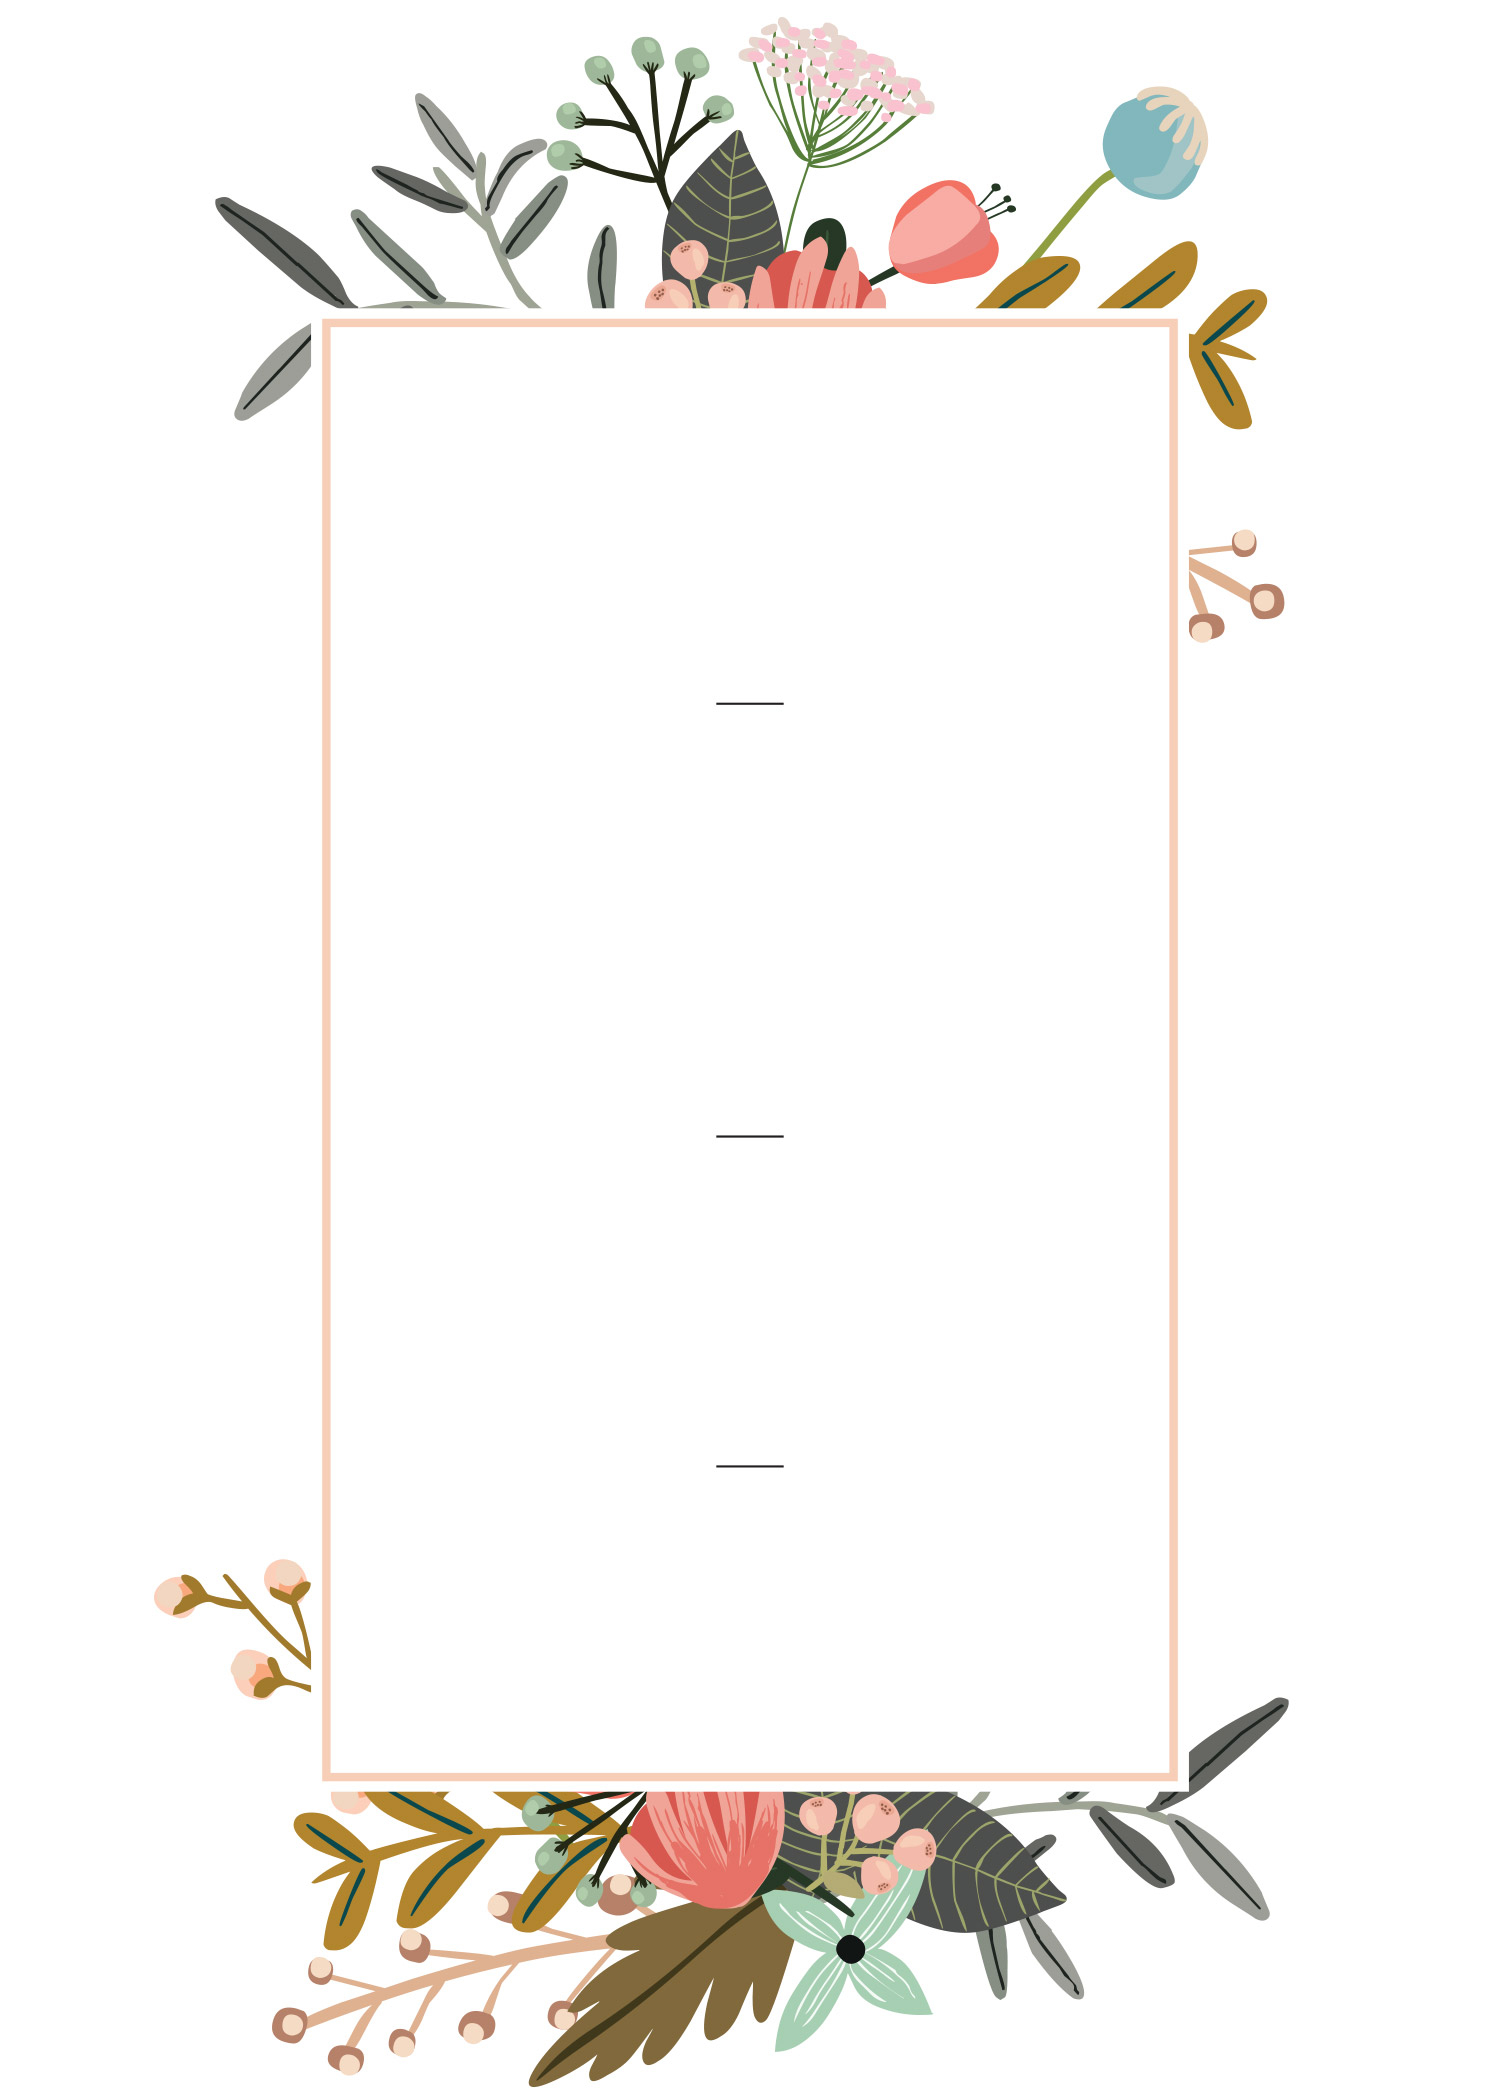 Editable Wedding Invitation Templates For The Perfect Card Shutterfly in size 1500 X 2100